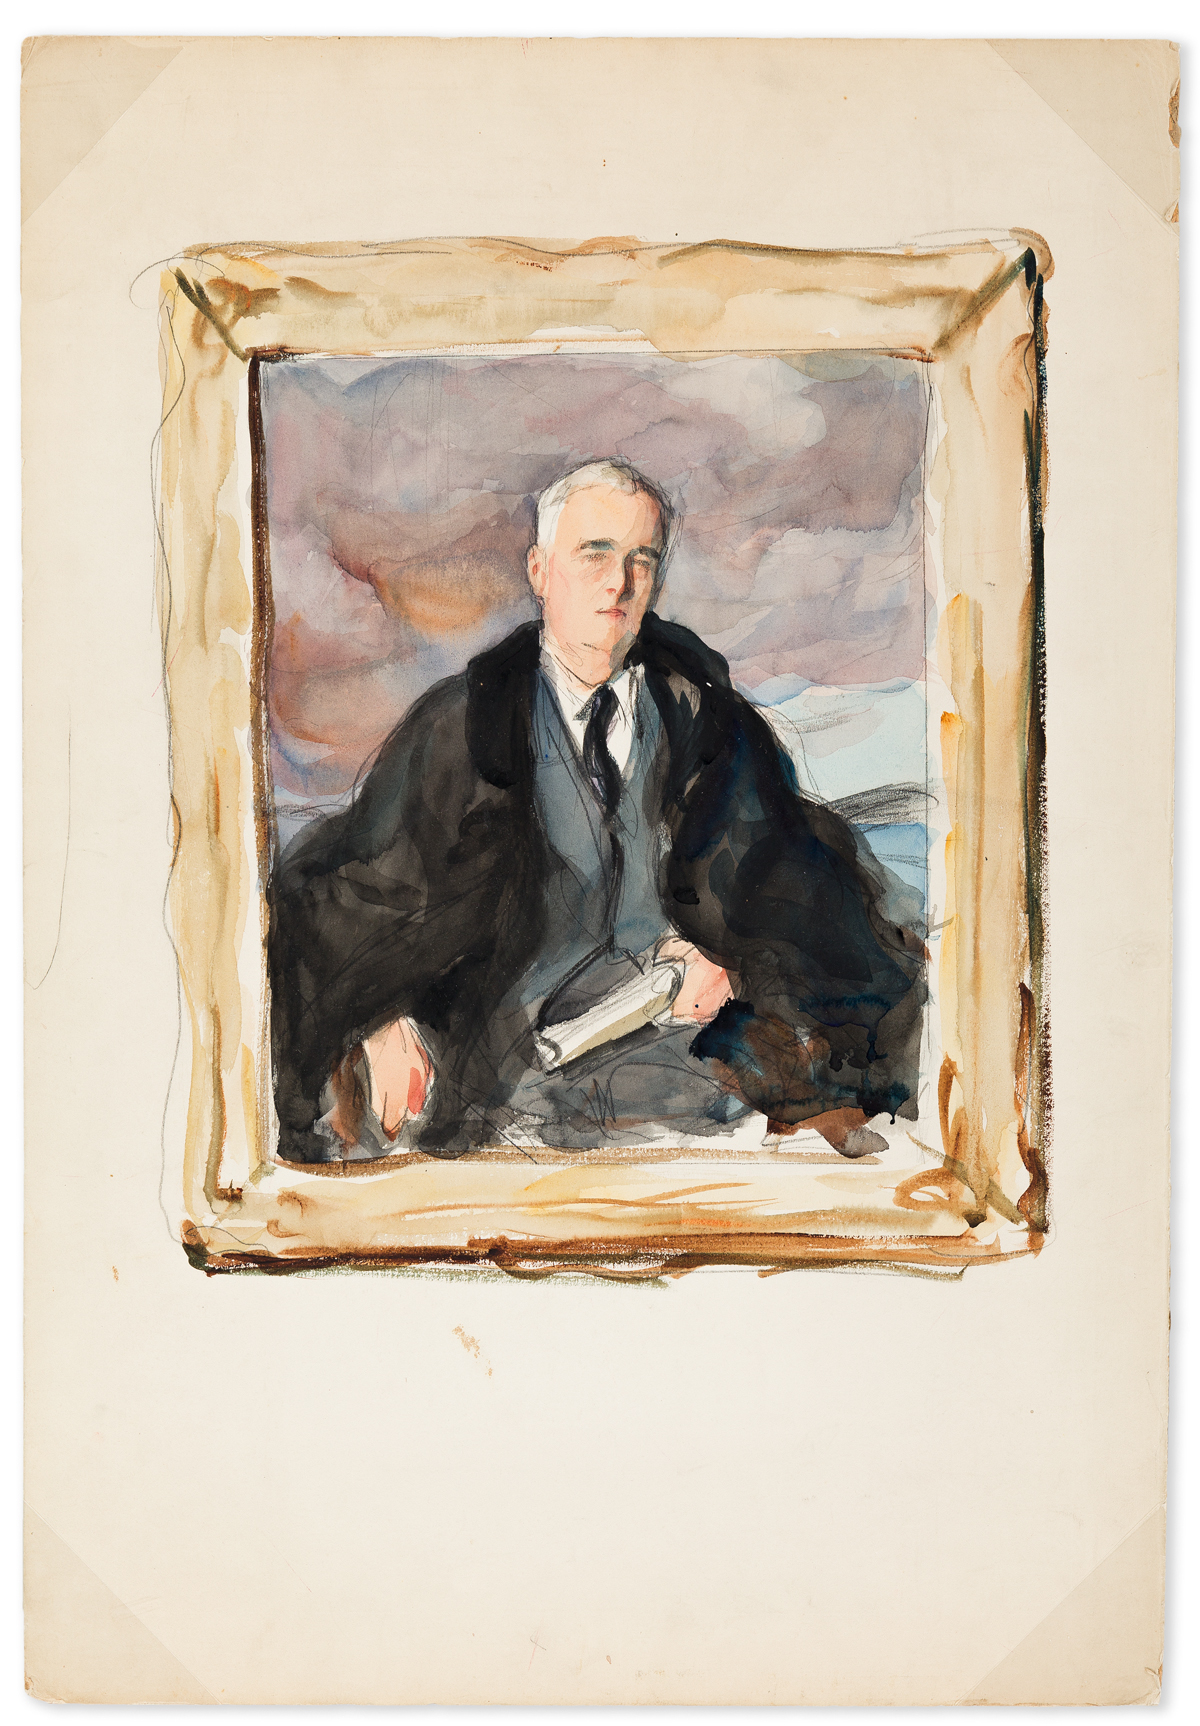 (PRESIDENTS--1945) Elizabeth Shoumatoff. Three watercolor studies for the famous Unfinished Portrait of Franklin D. Roosevelt.